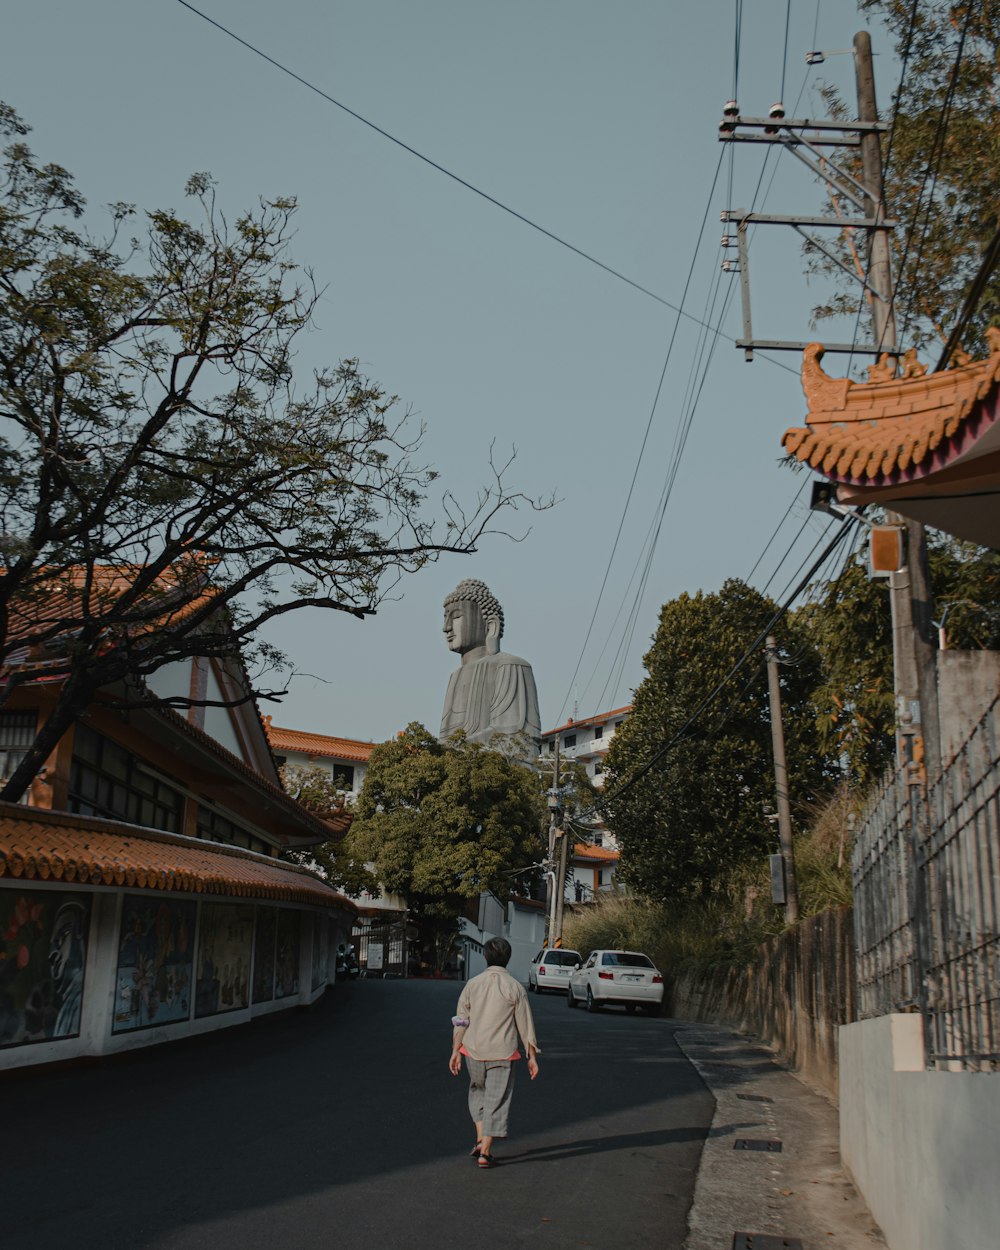 a person walking down a street with a large buddha statue in the background